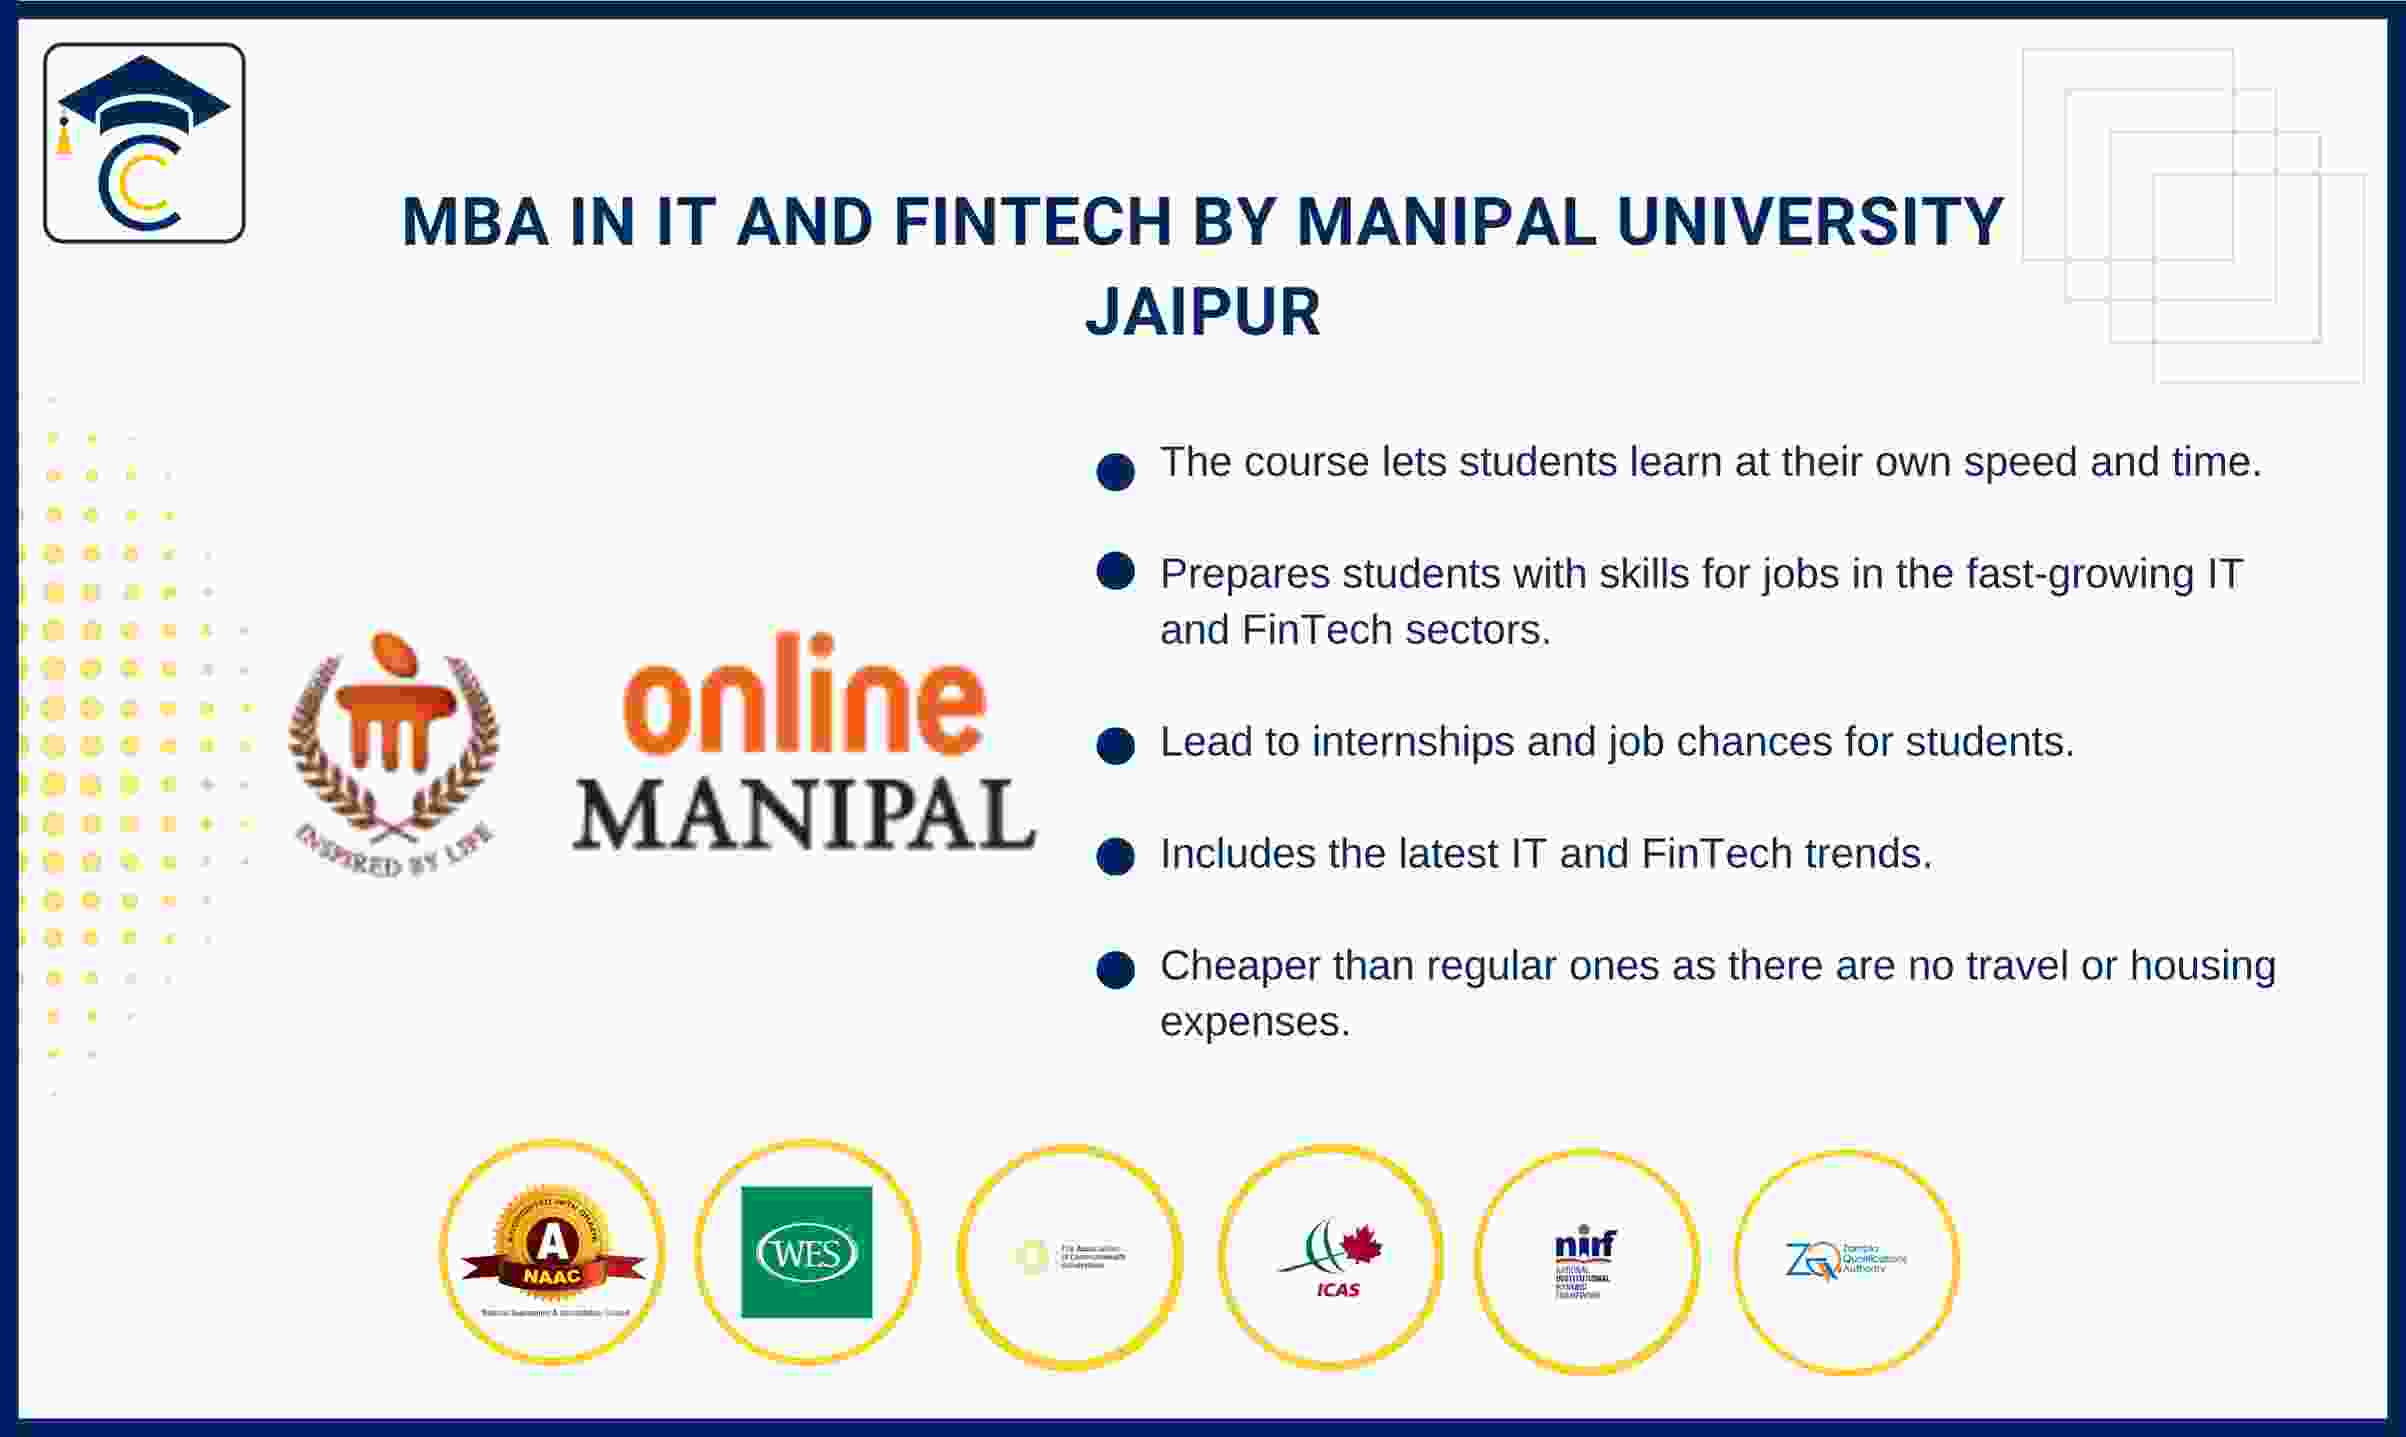 mba-in-it-and-fintech-manipal-university